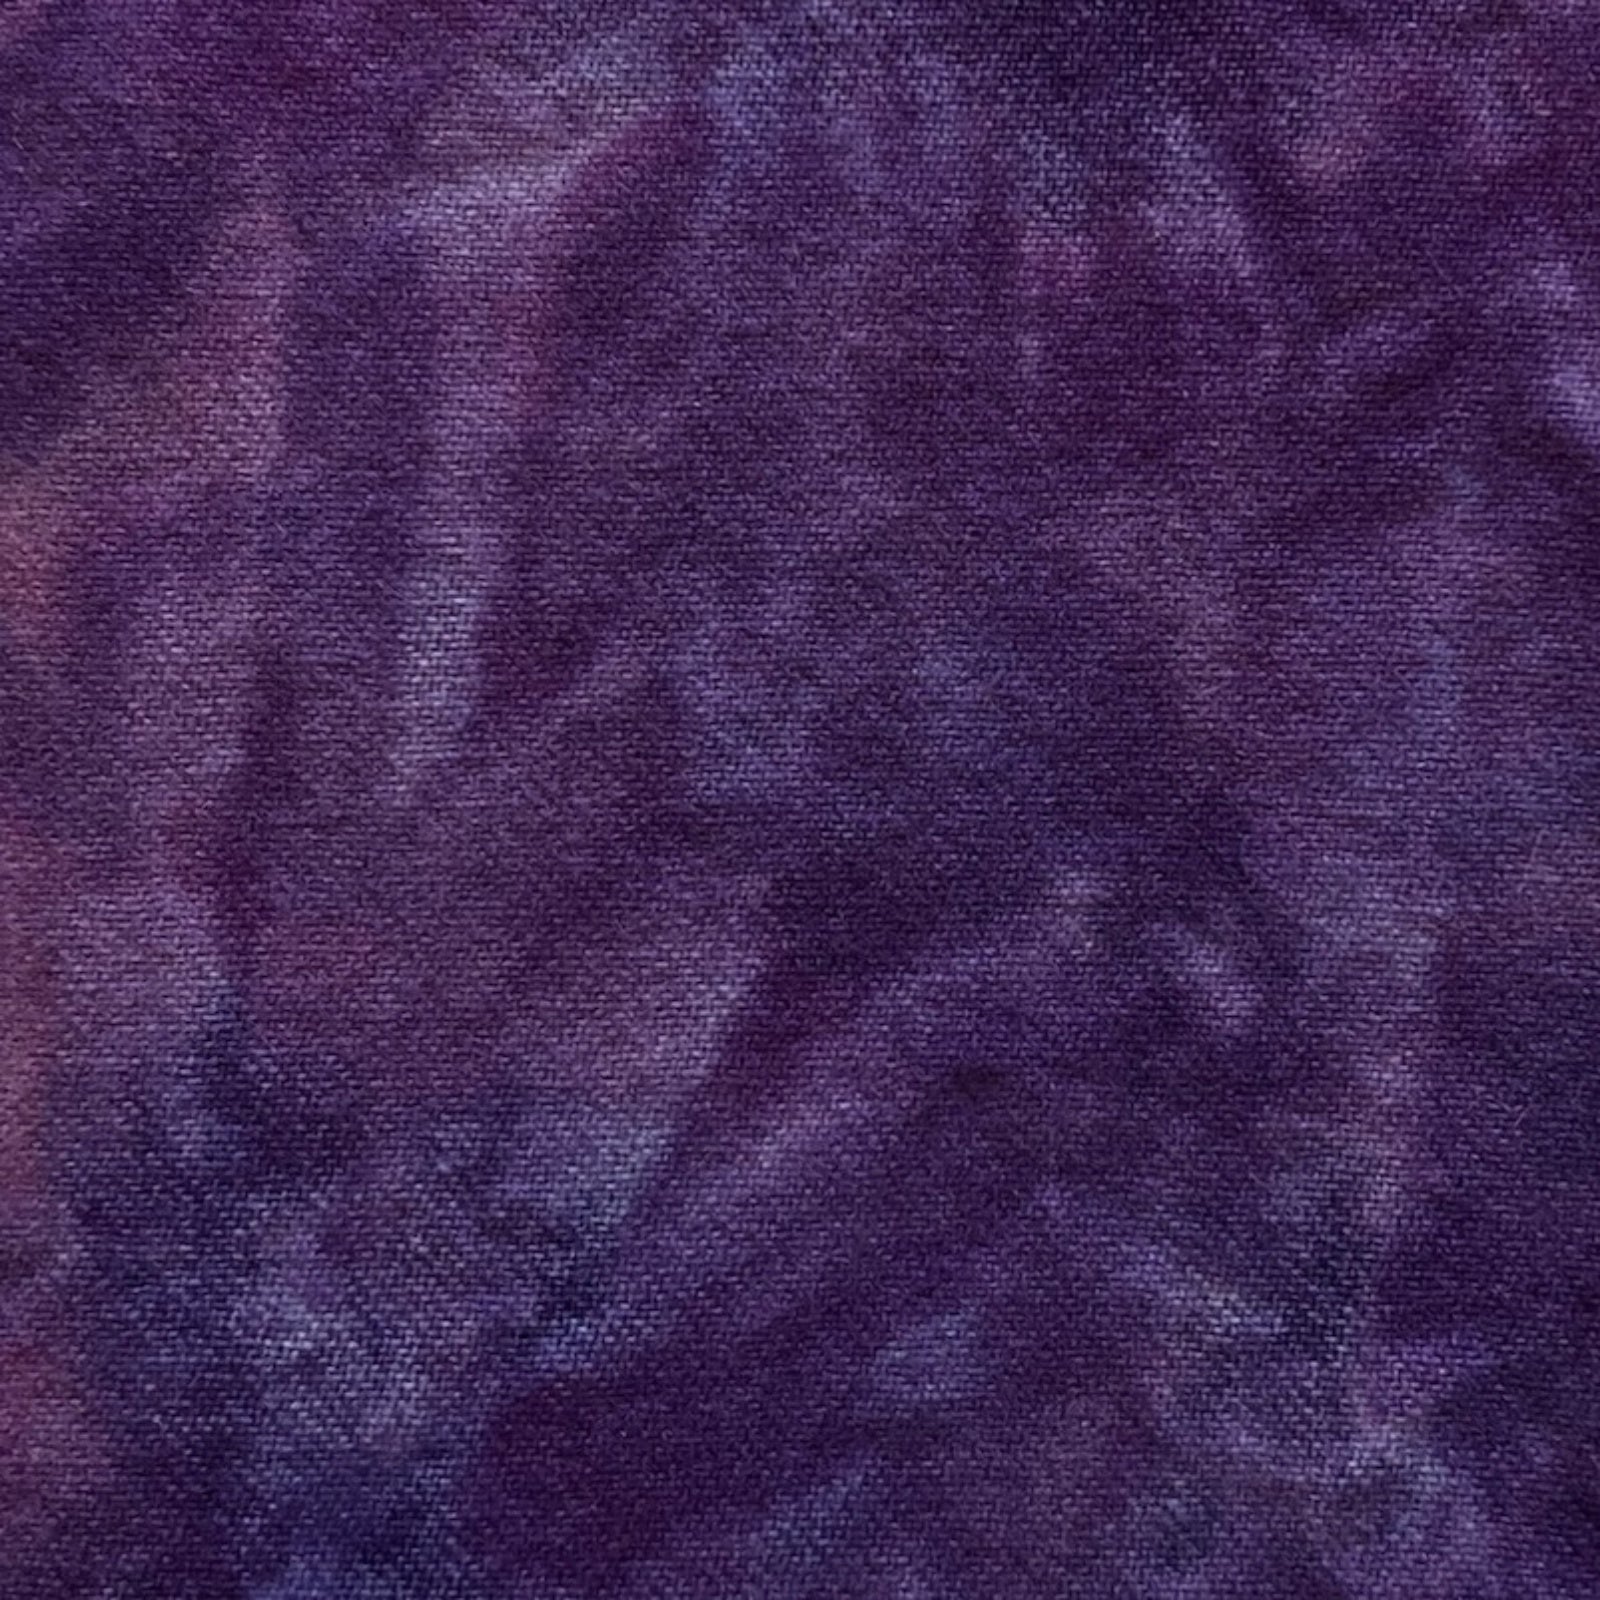 Purple Night - Colorama Hand Dyed Wool - Offered by HoneyBee Hive Rug Hooking